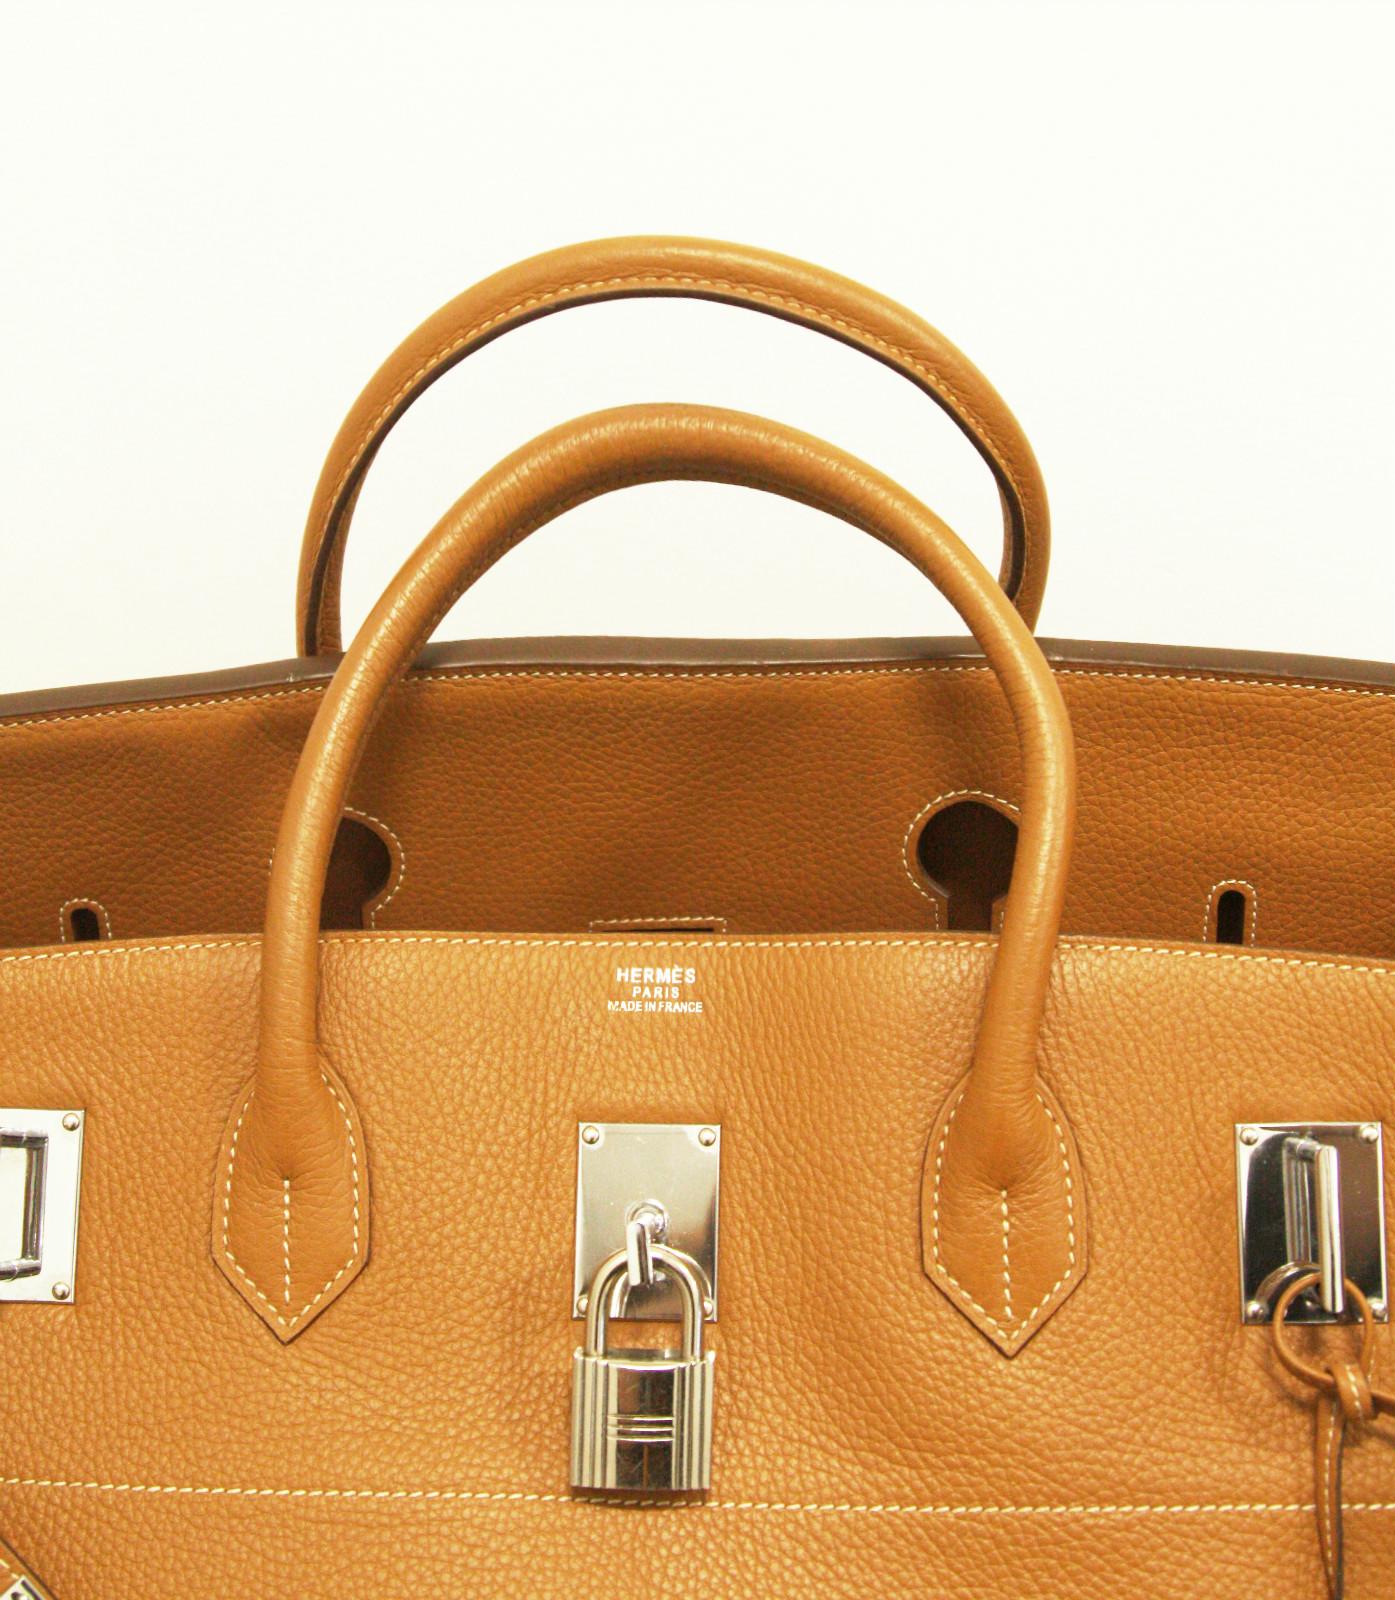 A rarely seen reimagining of the iconic Hermes Birkin, this spectacularly large HAC Birkin is a must-have piece for any lover of Hermes. In the highly sought-after shade of Gold, a caramel brown, and accented with gold-tone hardware, its subtle